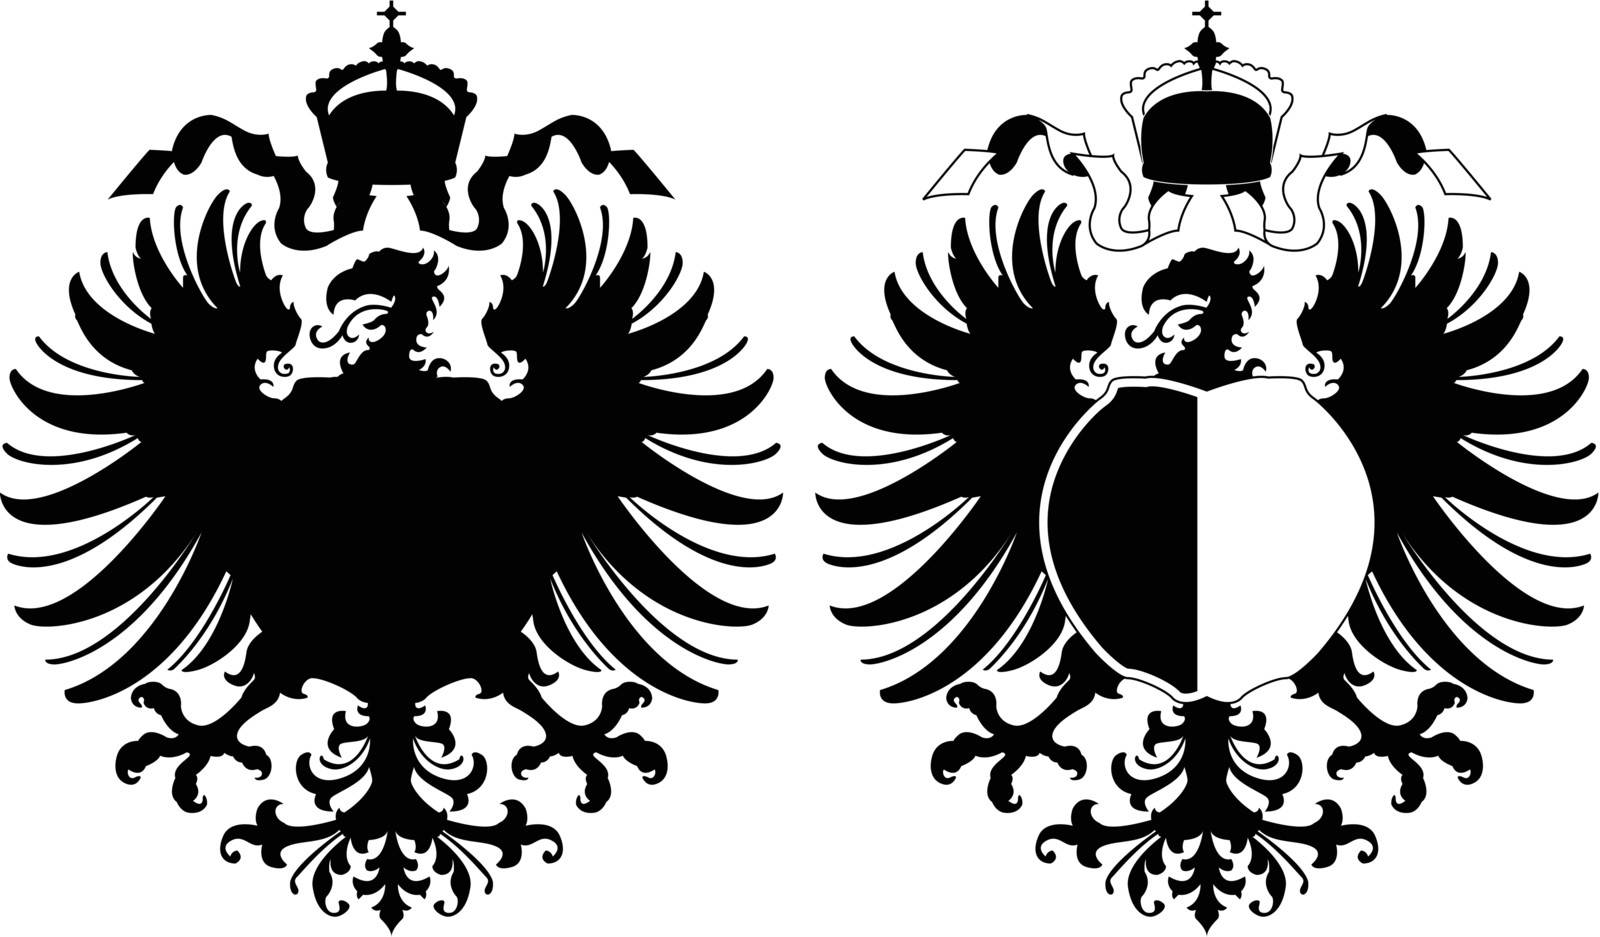 Vecor of 2 arms with an eagle on white